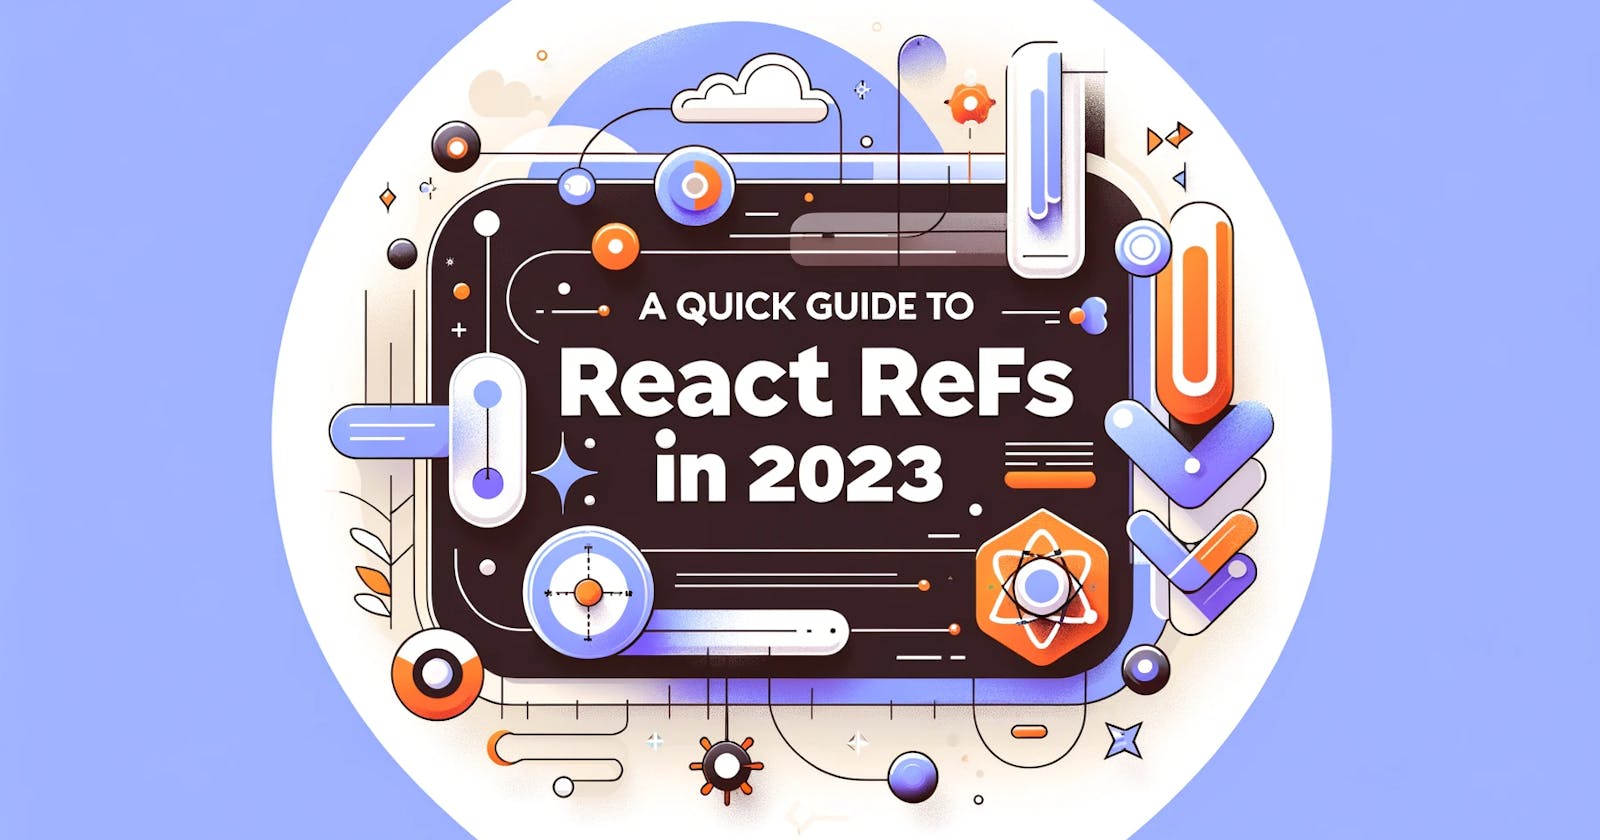 Use Ref in React - the right way